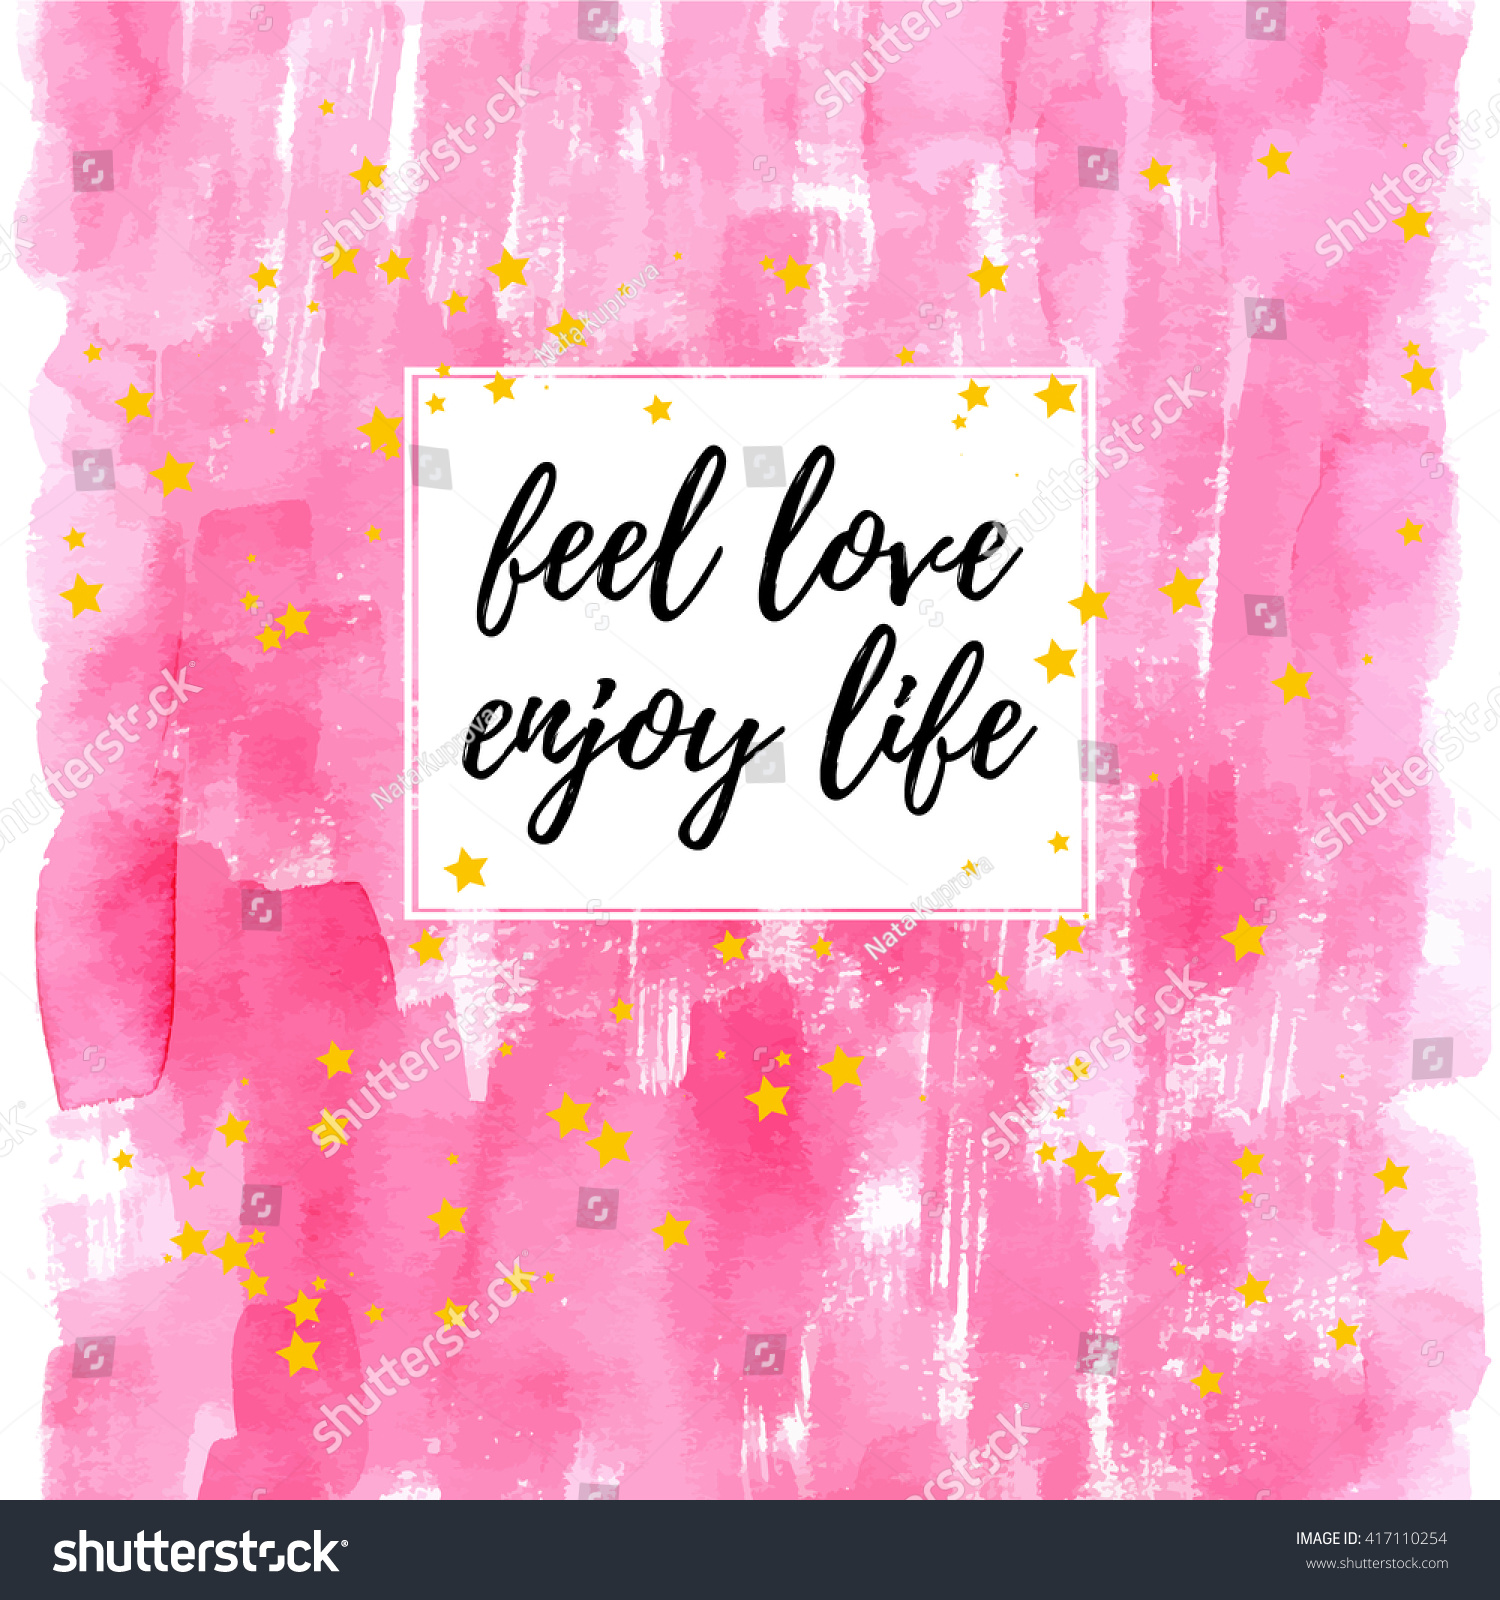 Feel love enjoy life inspirational quote greeting card Vector hand lettering with pink watercolor abstract